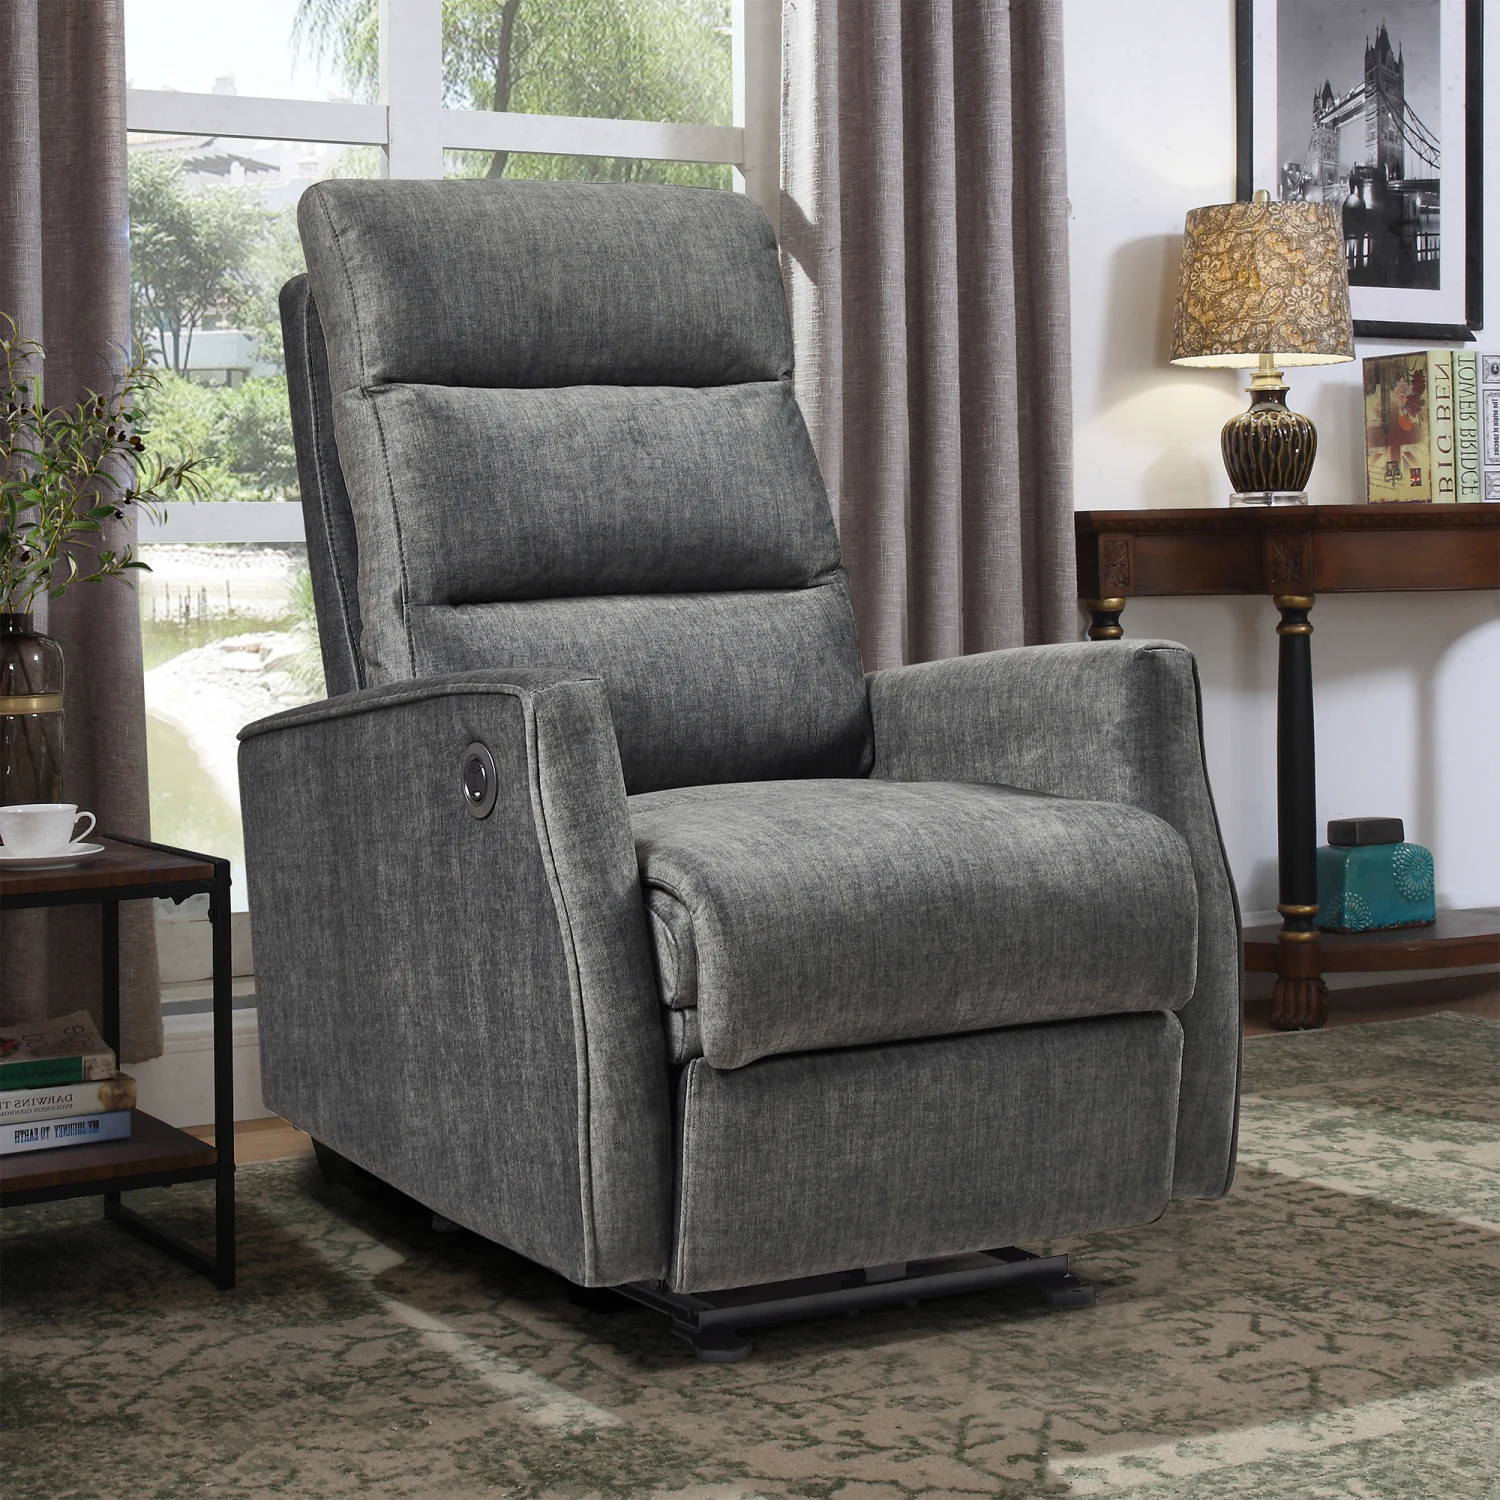 

Hot selling For 10 Years ,Recliner Chair With Power function easy control big stocks , Recliner Single Chair For Living Room , B